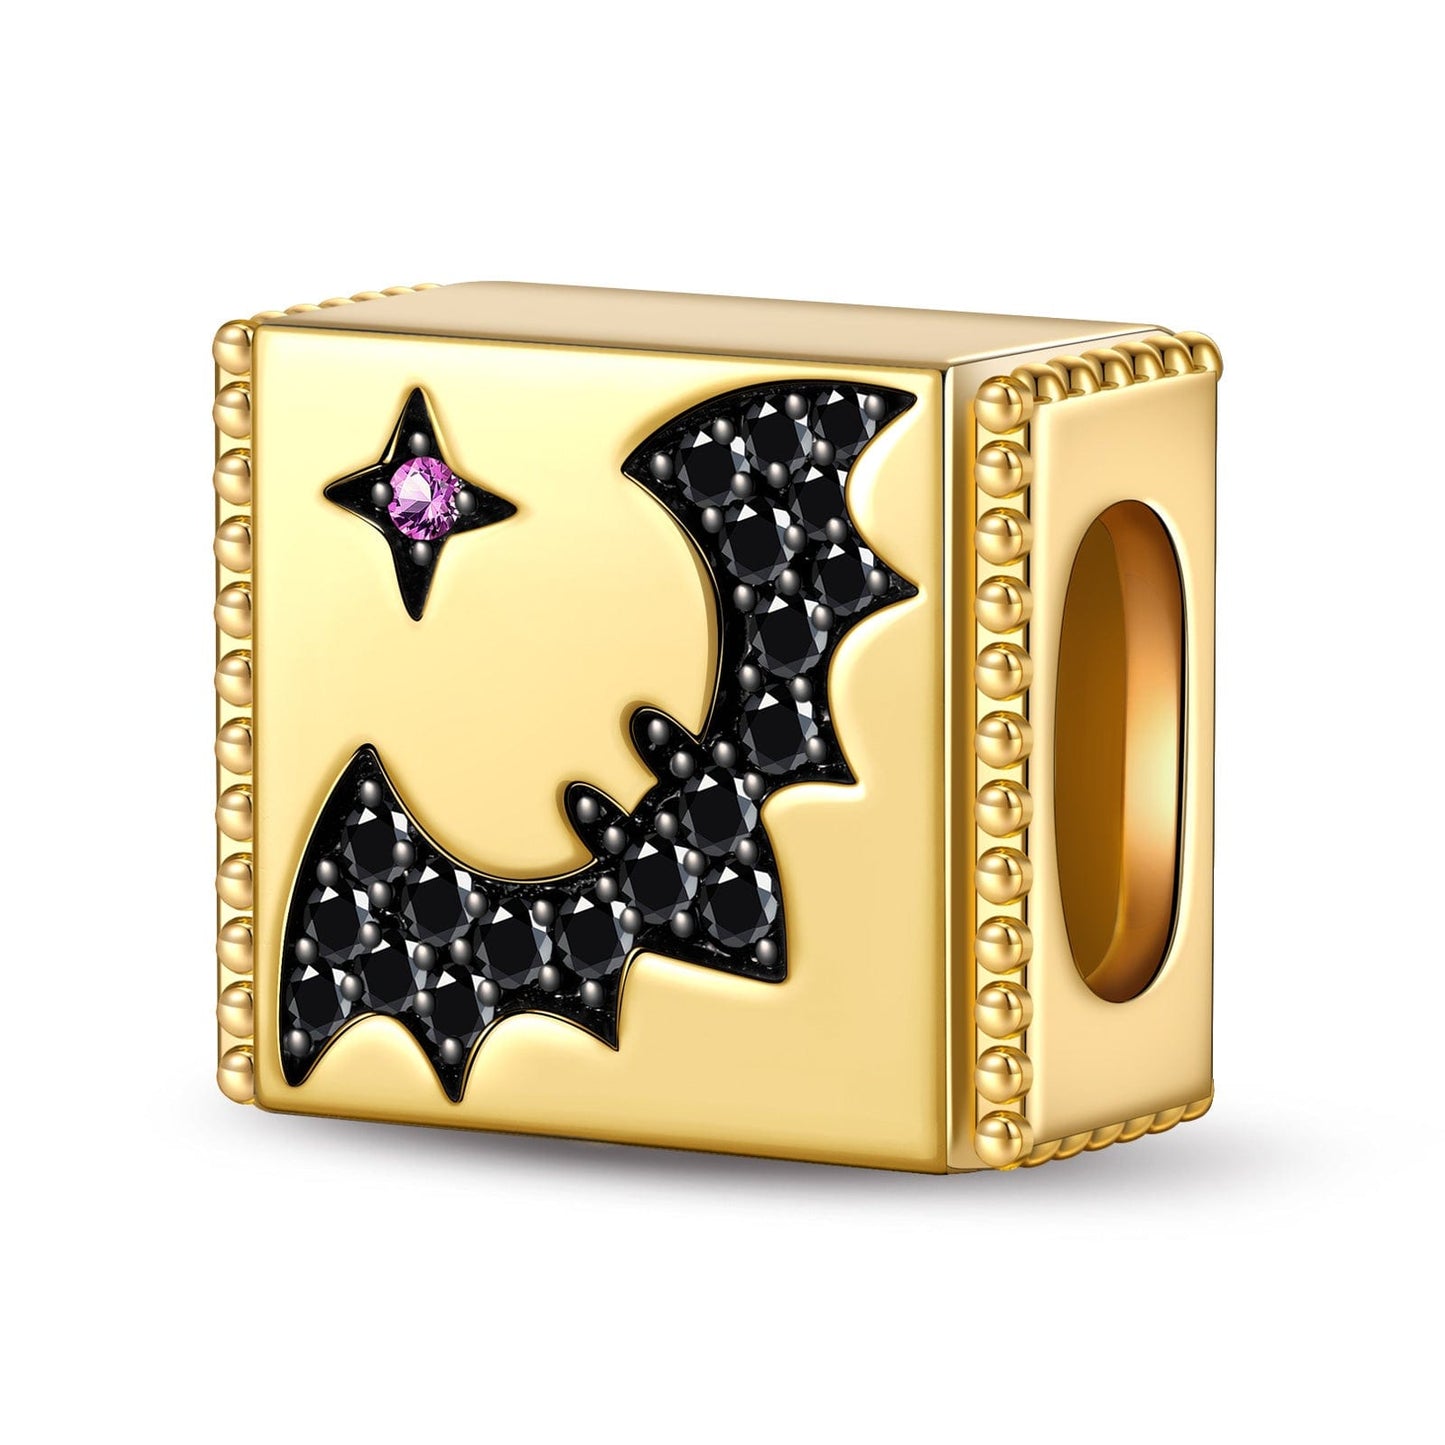 Flapping Bat Tarnish-resistant Silver Rectangular Charms In 14K Gold Plated